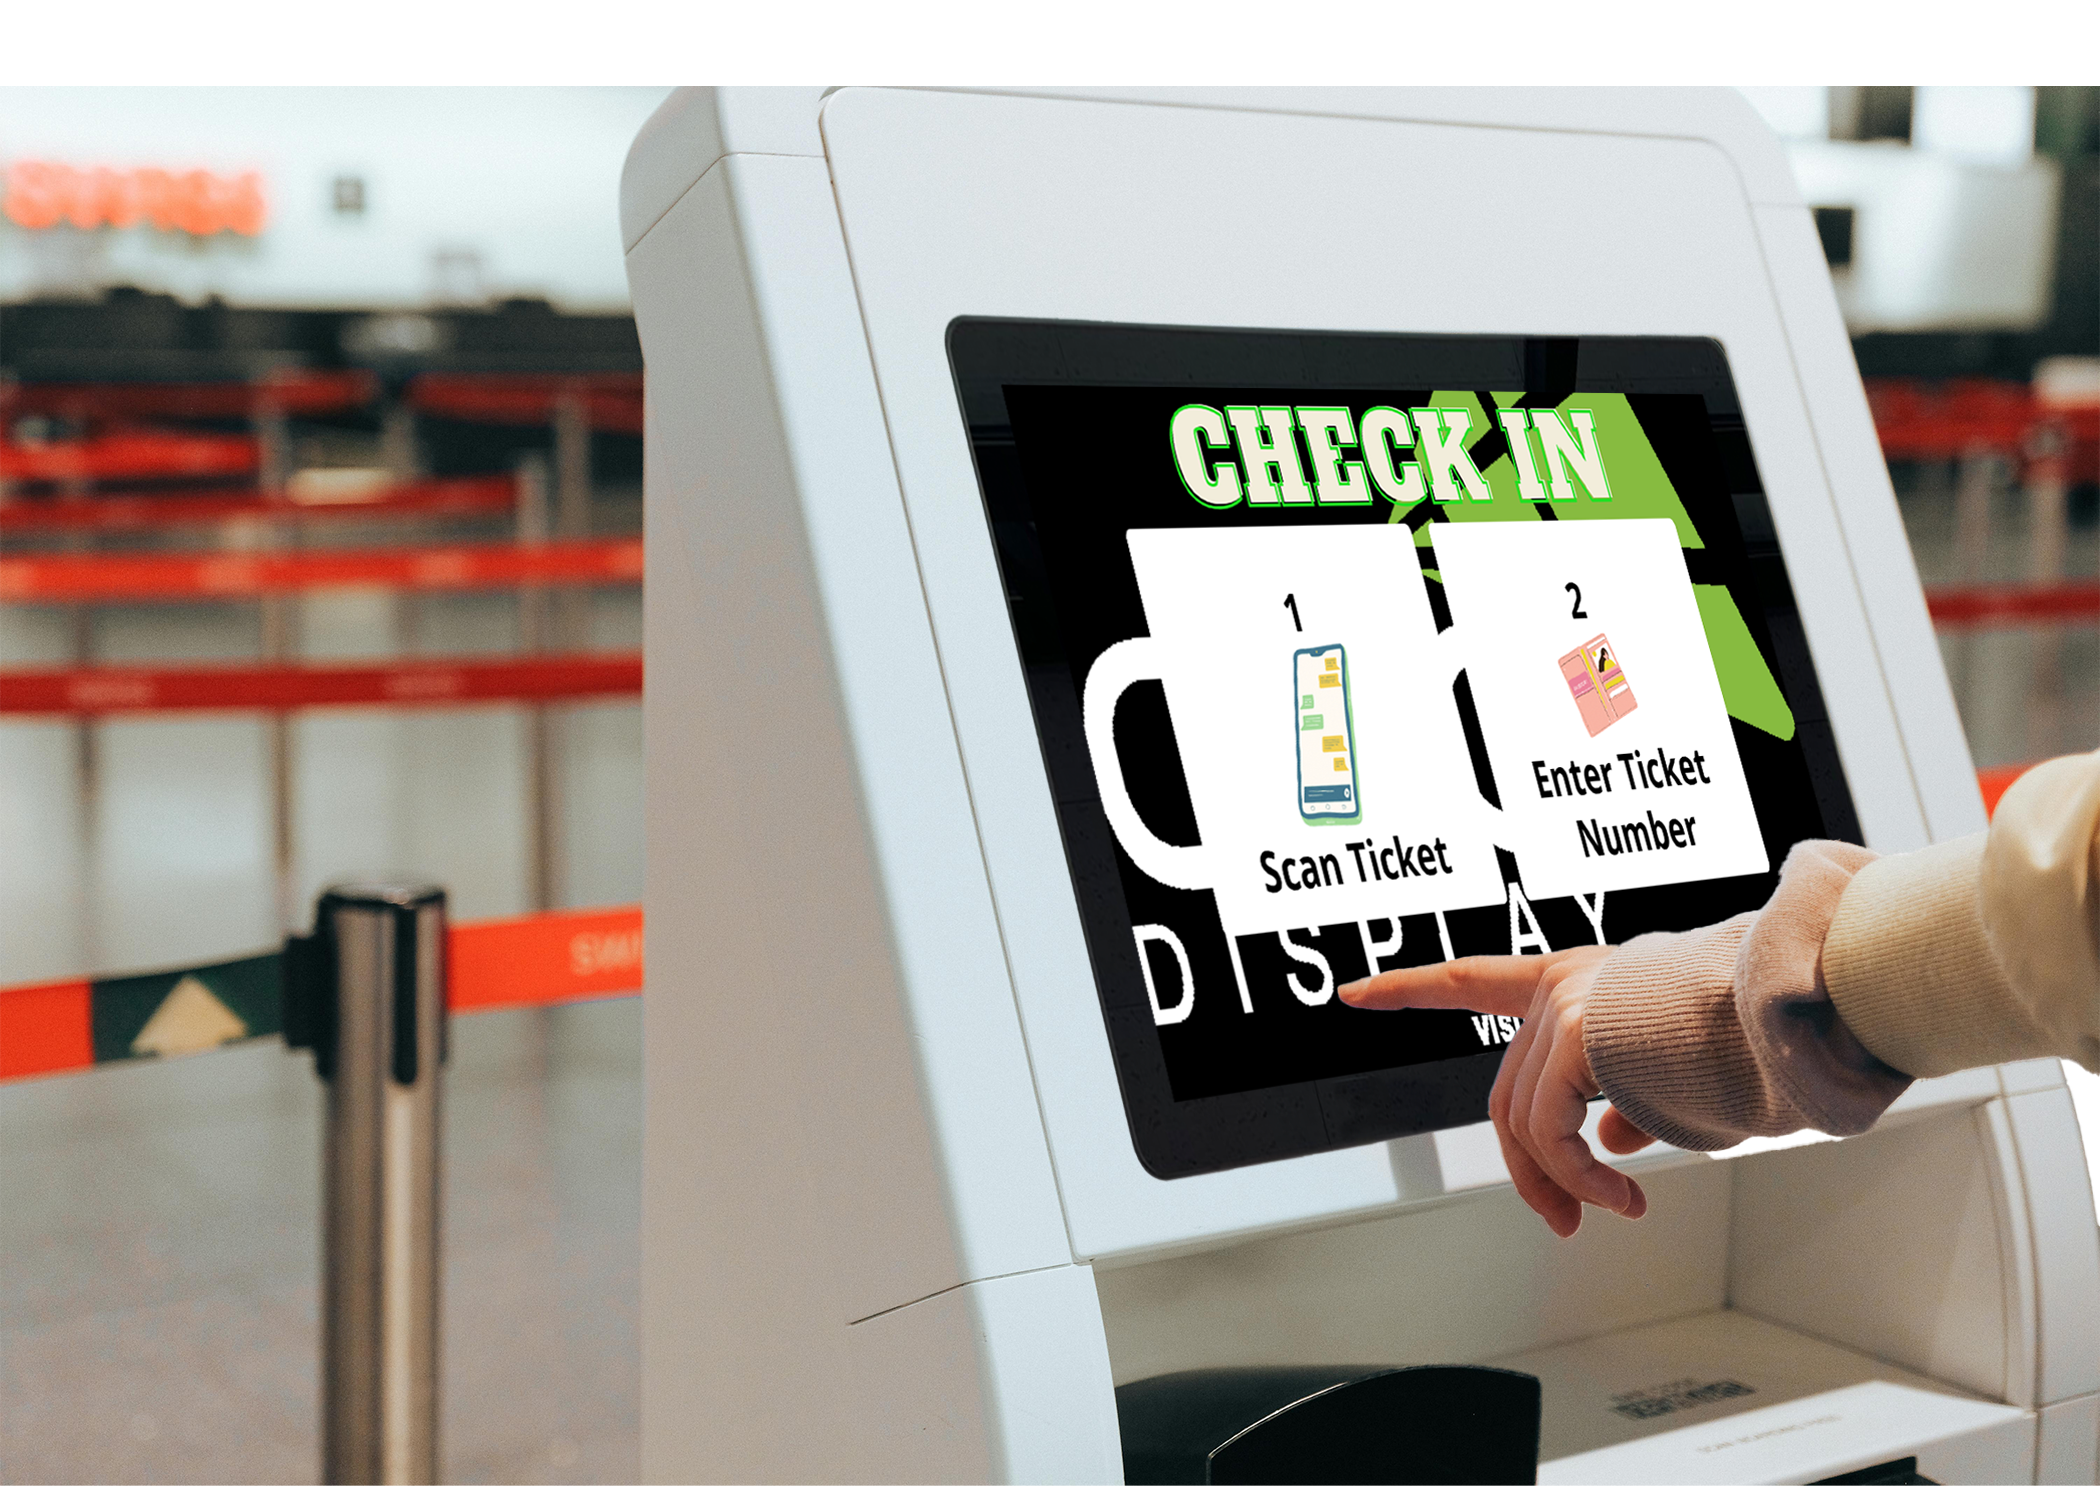 airport check-in touch screen kiosk with "Scan ticket" and "Enter Ticket Number" options visible, hand pointing toward "Scan Ticket"